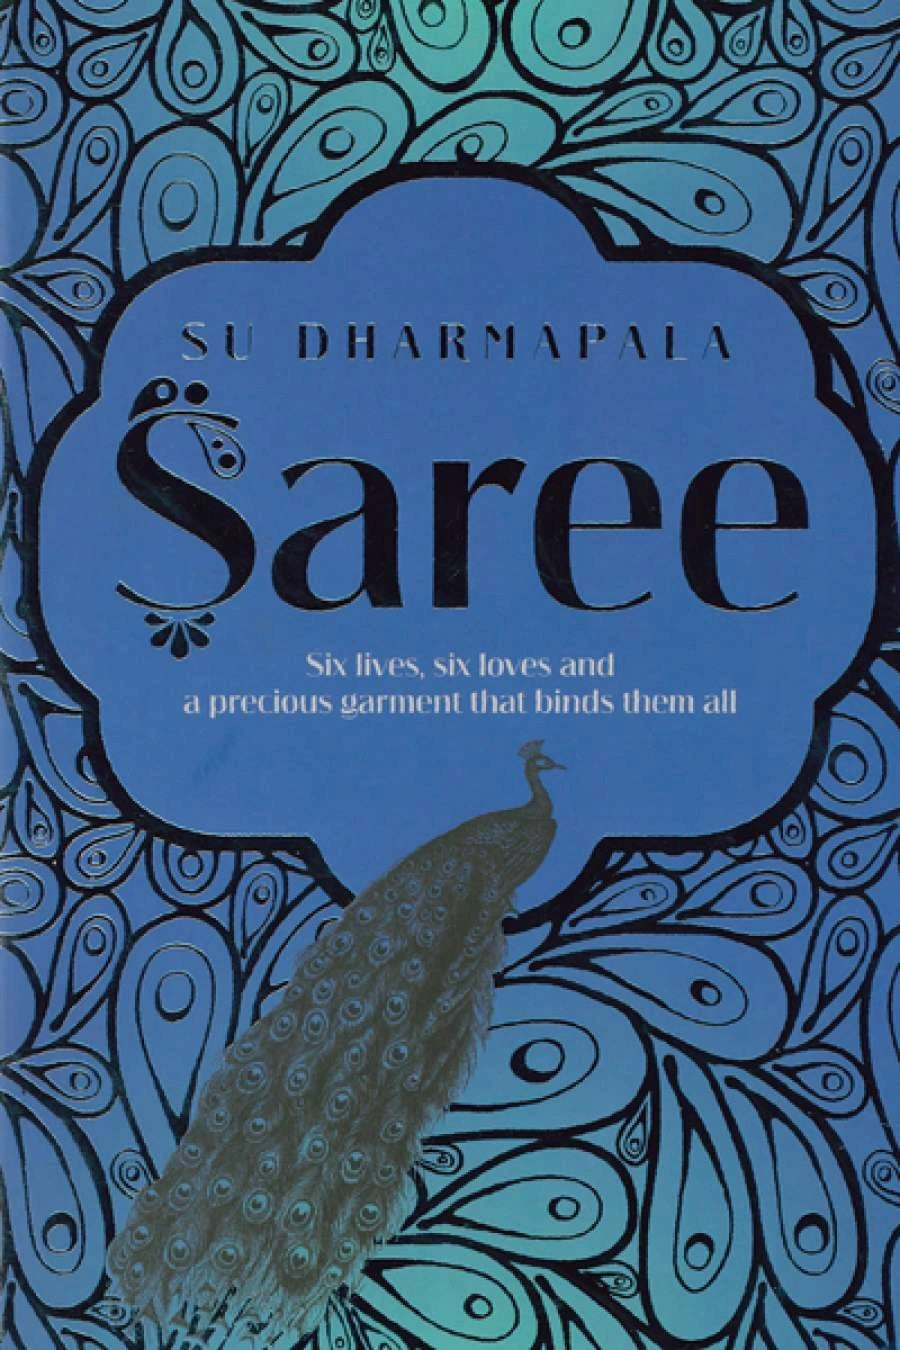 Saree by Su Dharmapala: stock image of front cover.